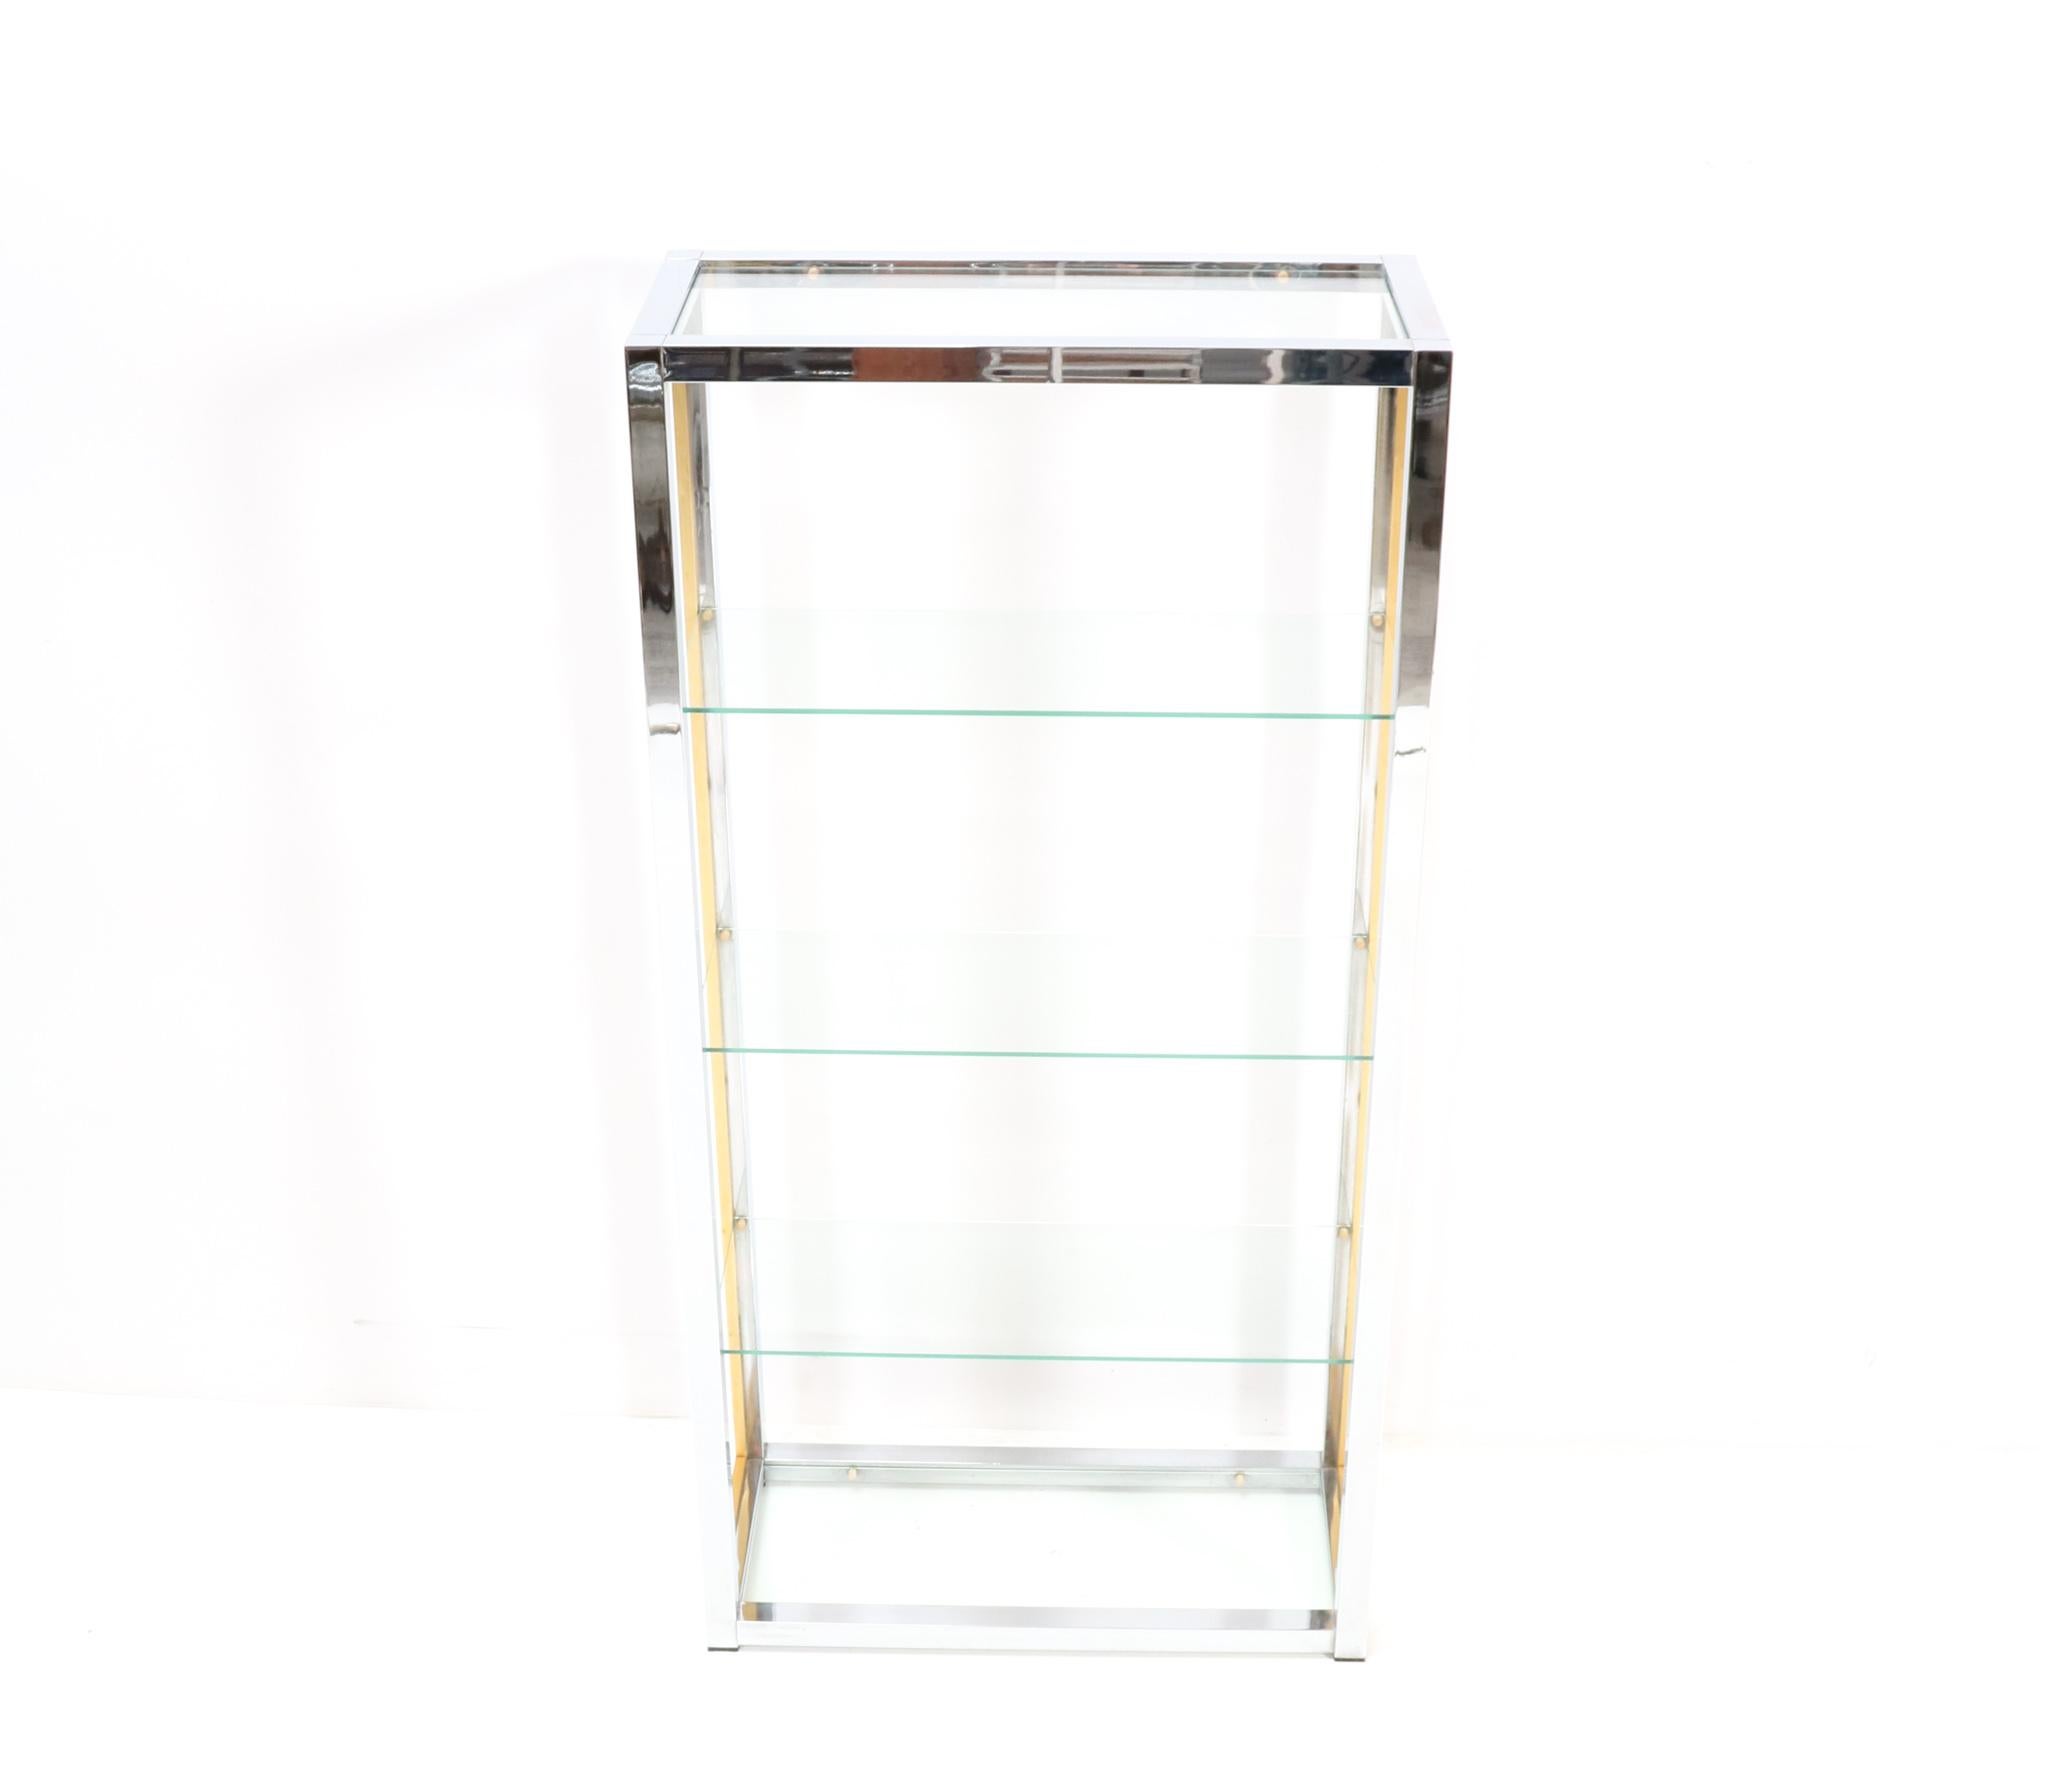 Hollywood Regency Italian Chrome and Brass Etagere by Renato Zevi, 1970s For Sale 4